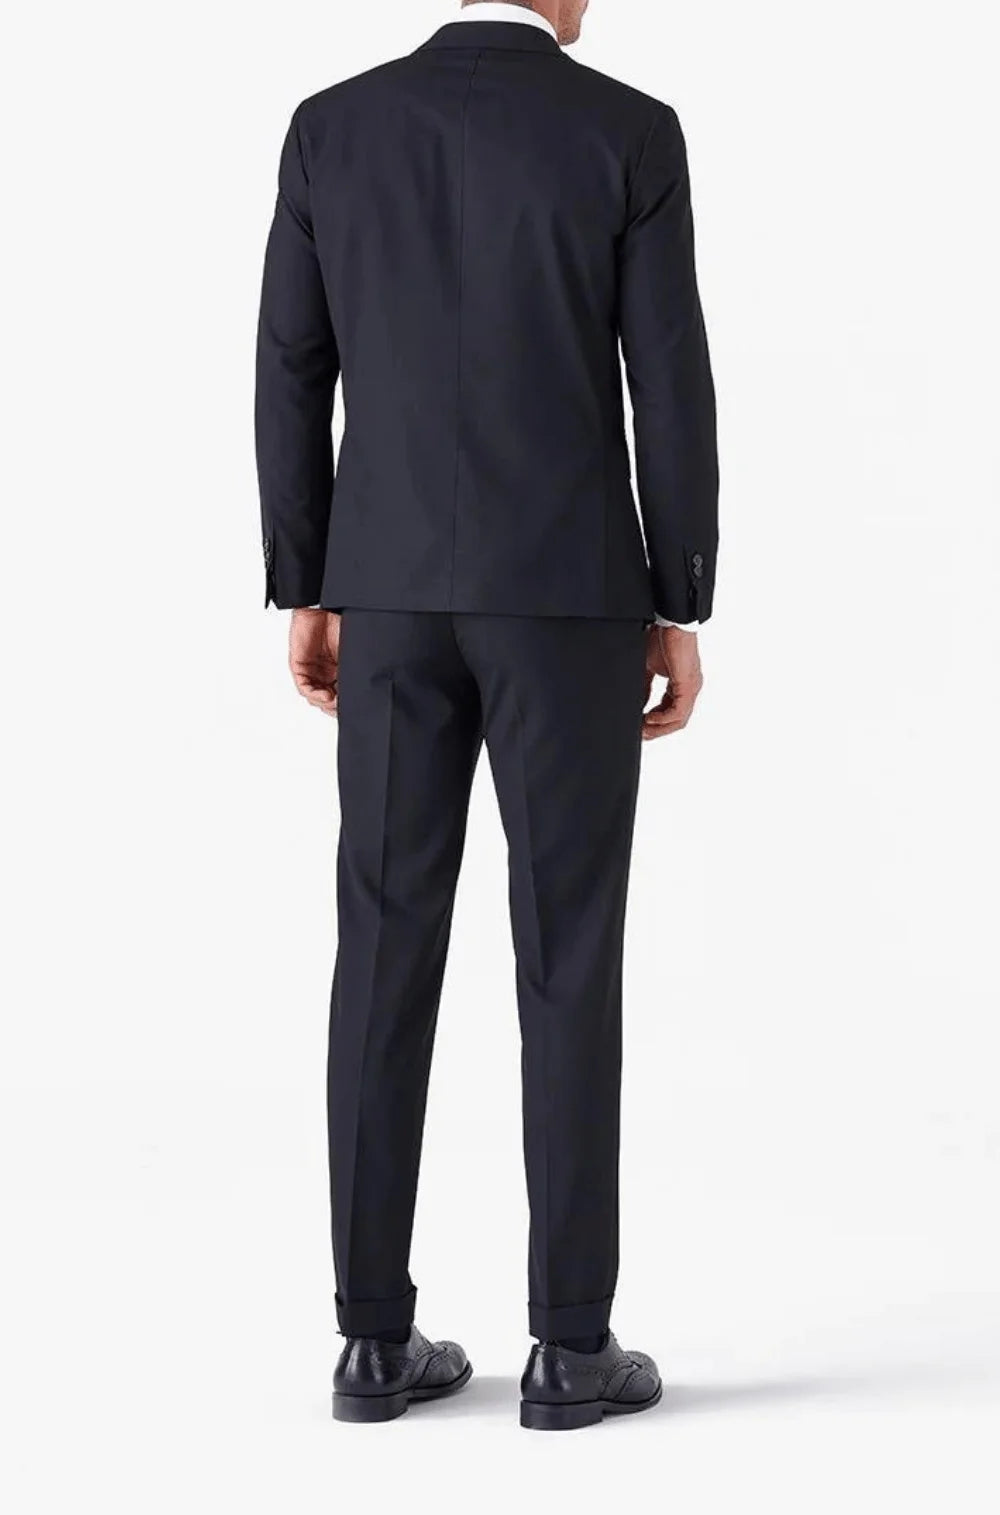 Men's Fusaro Max Classic Wool Blend Suit In Black (21107) - available in-store, 337 Monty Naicker Street, Durban CBD or online at Omar's Tailors & Outfitters online store.   A men's fashion curation for South African men - established in 1911.